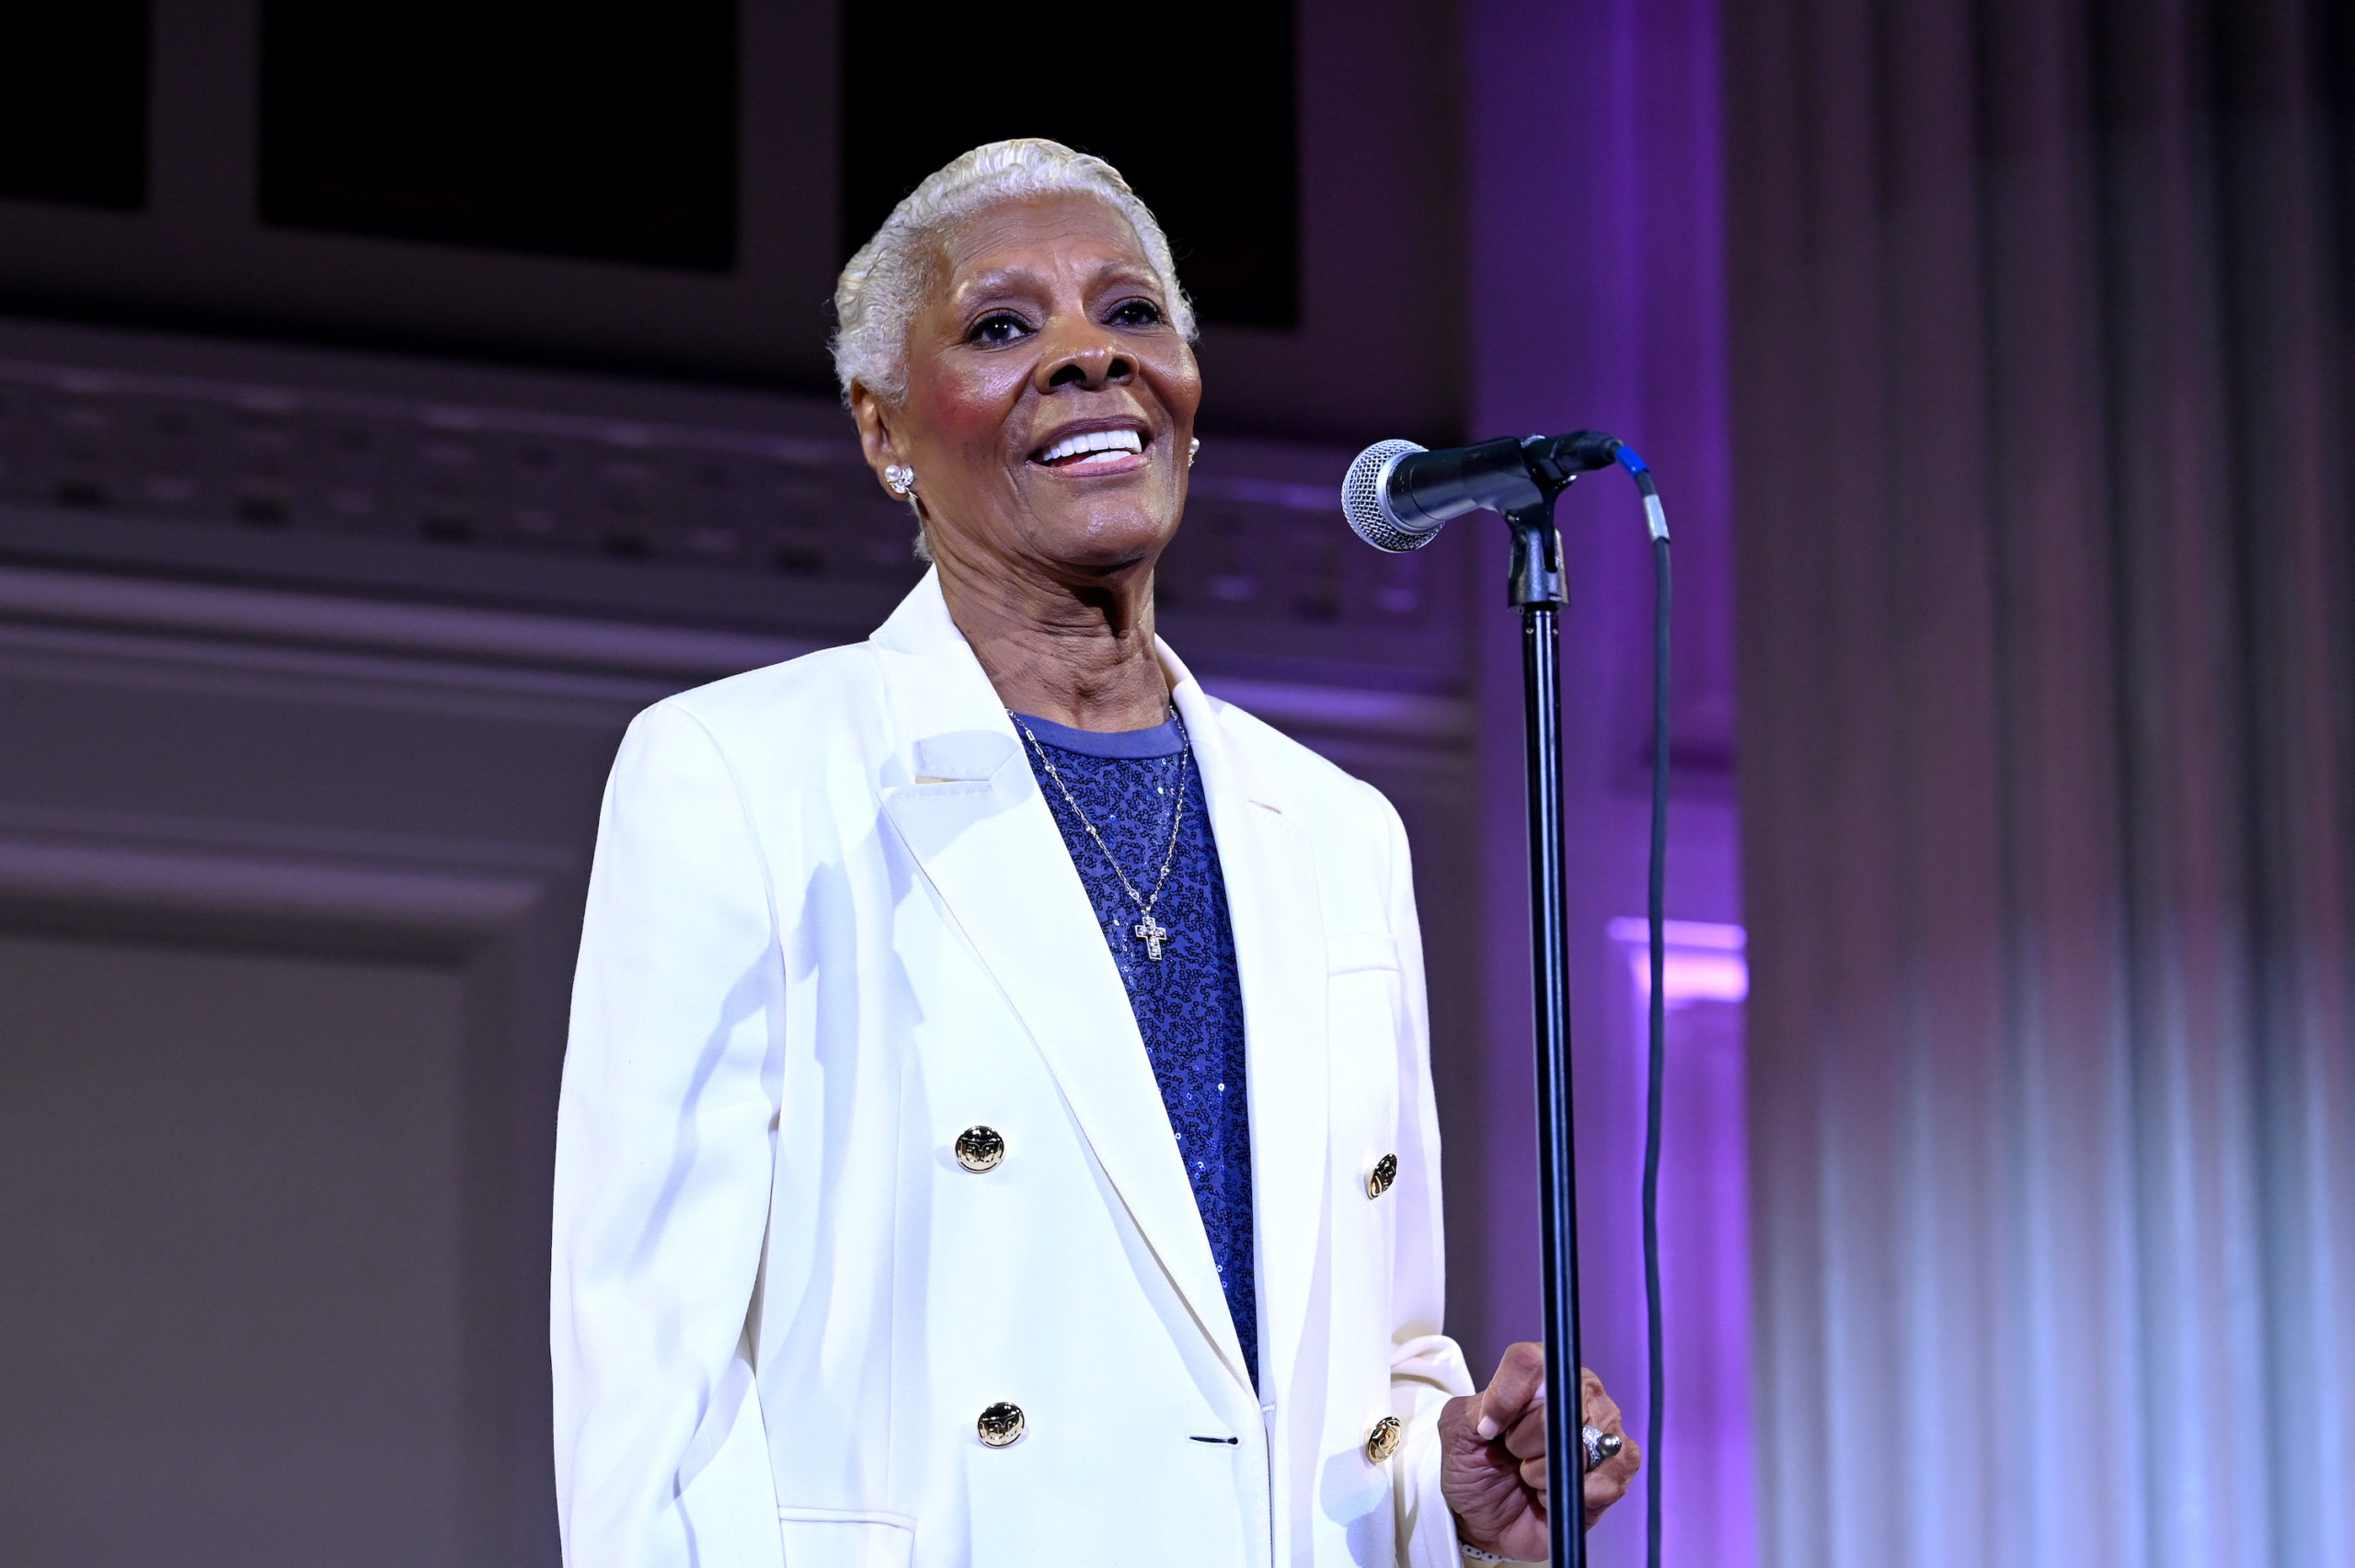  NEW YORK, NEW YORK - SEPTEMBER 19: Dionne Warwick performs on stage at The F4D 2nd Annual Sustainable Goals Banquet on September 19, 2022 in New York City. (Photo by Slaven Vlasic/Getty Images for Fashion 4 Development)